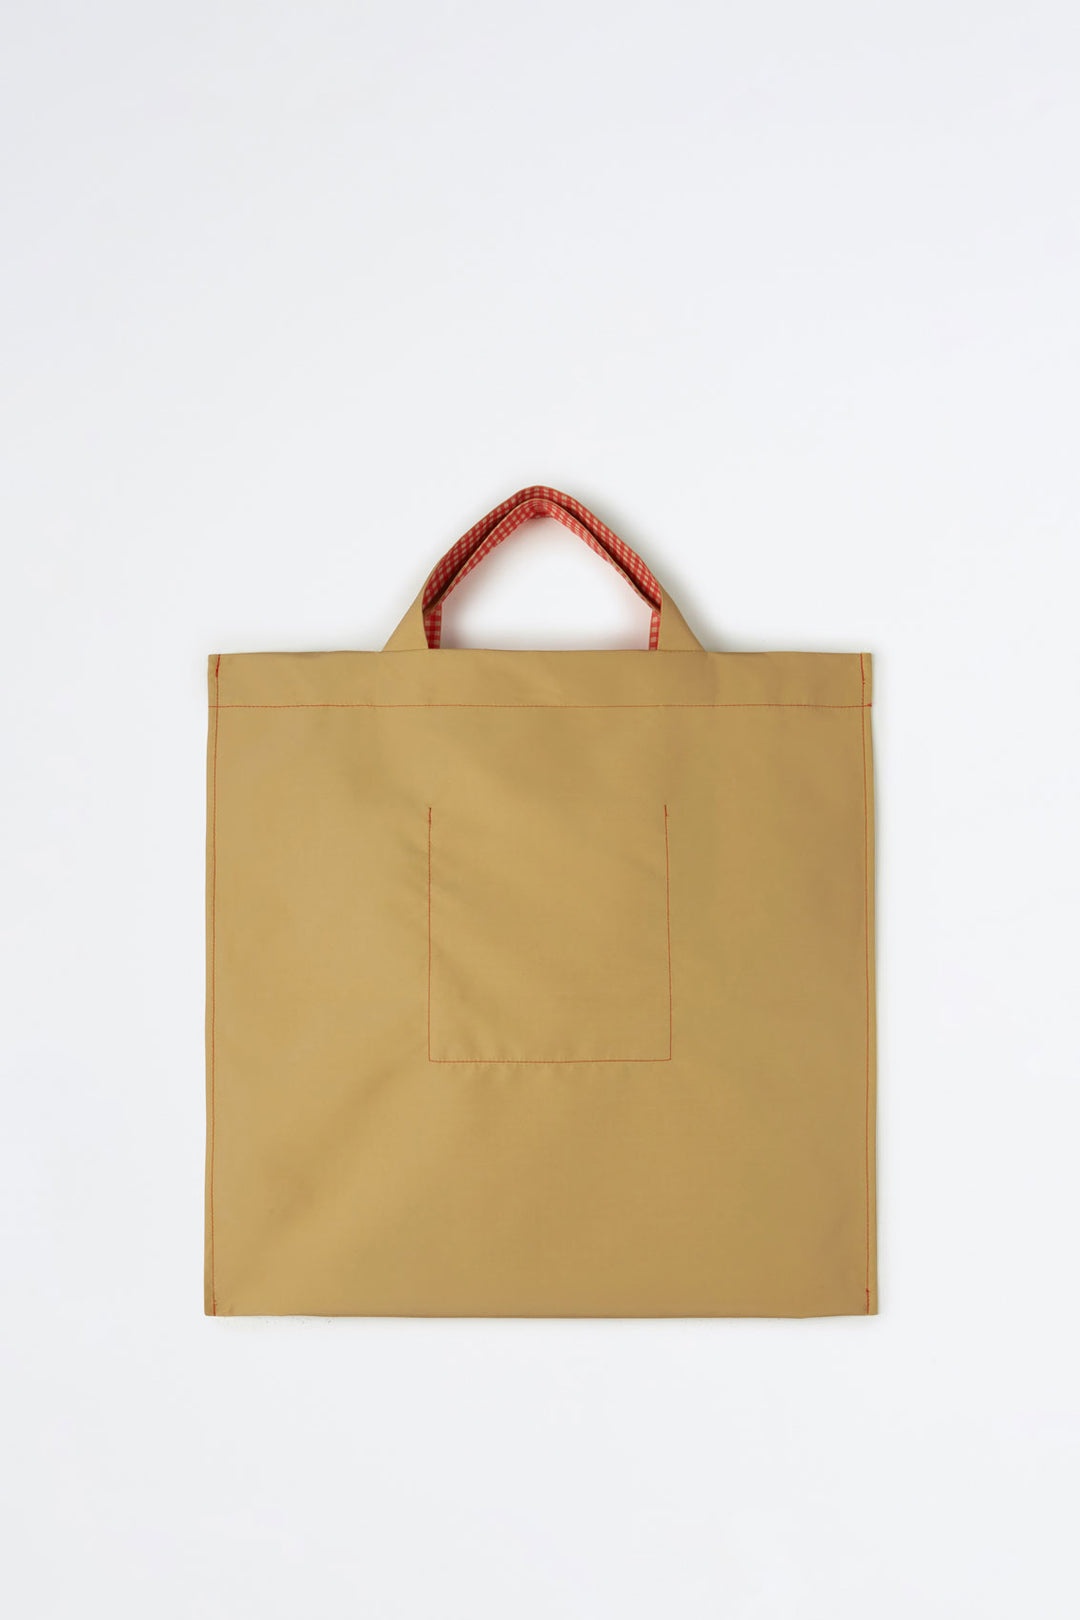 EVERYDAY I WEAR SUNNEI YELLOW TOTE BAG - 4